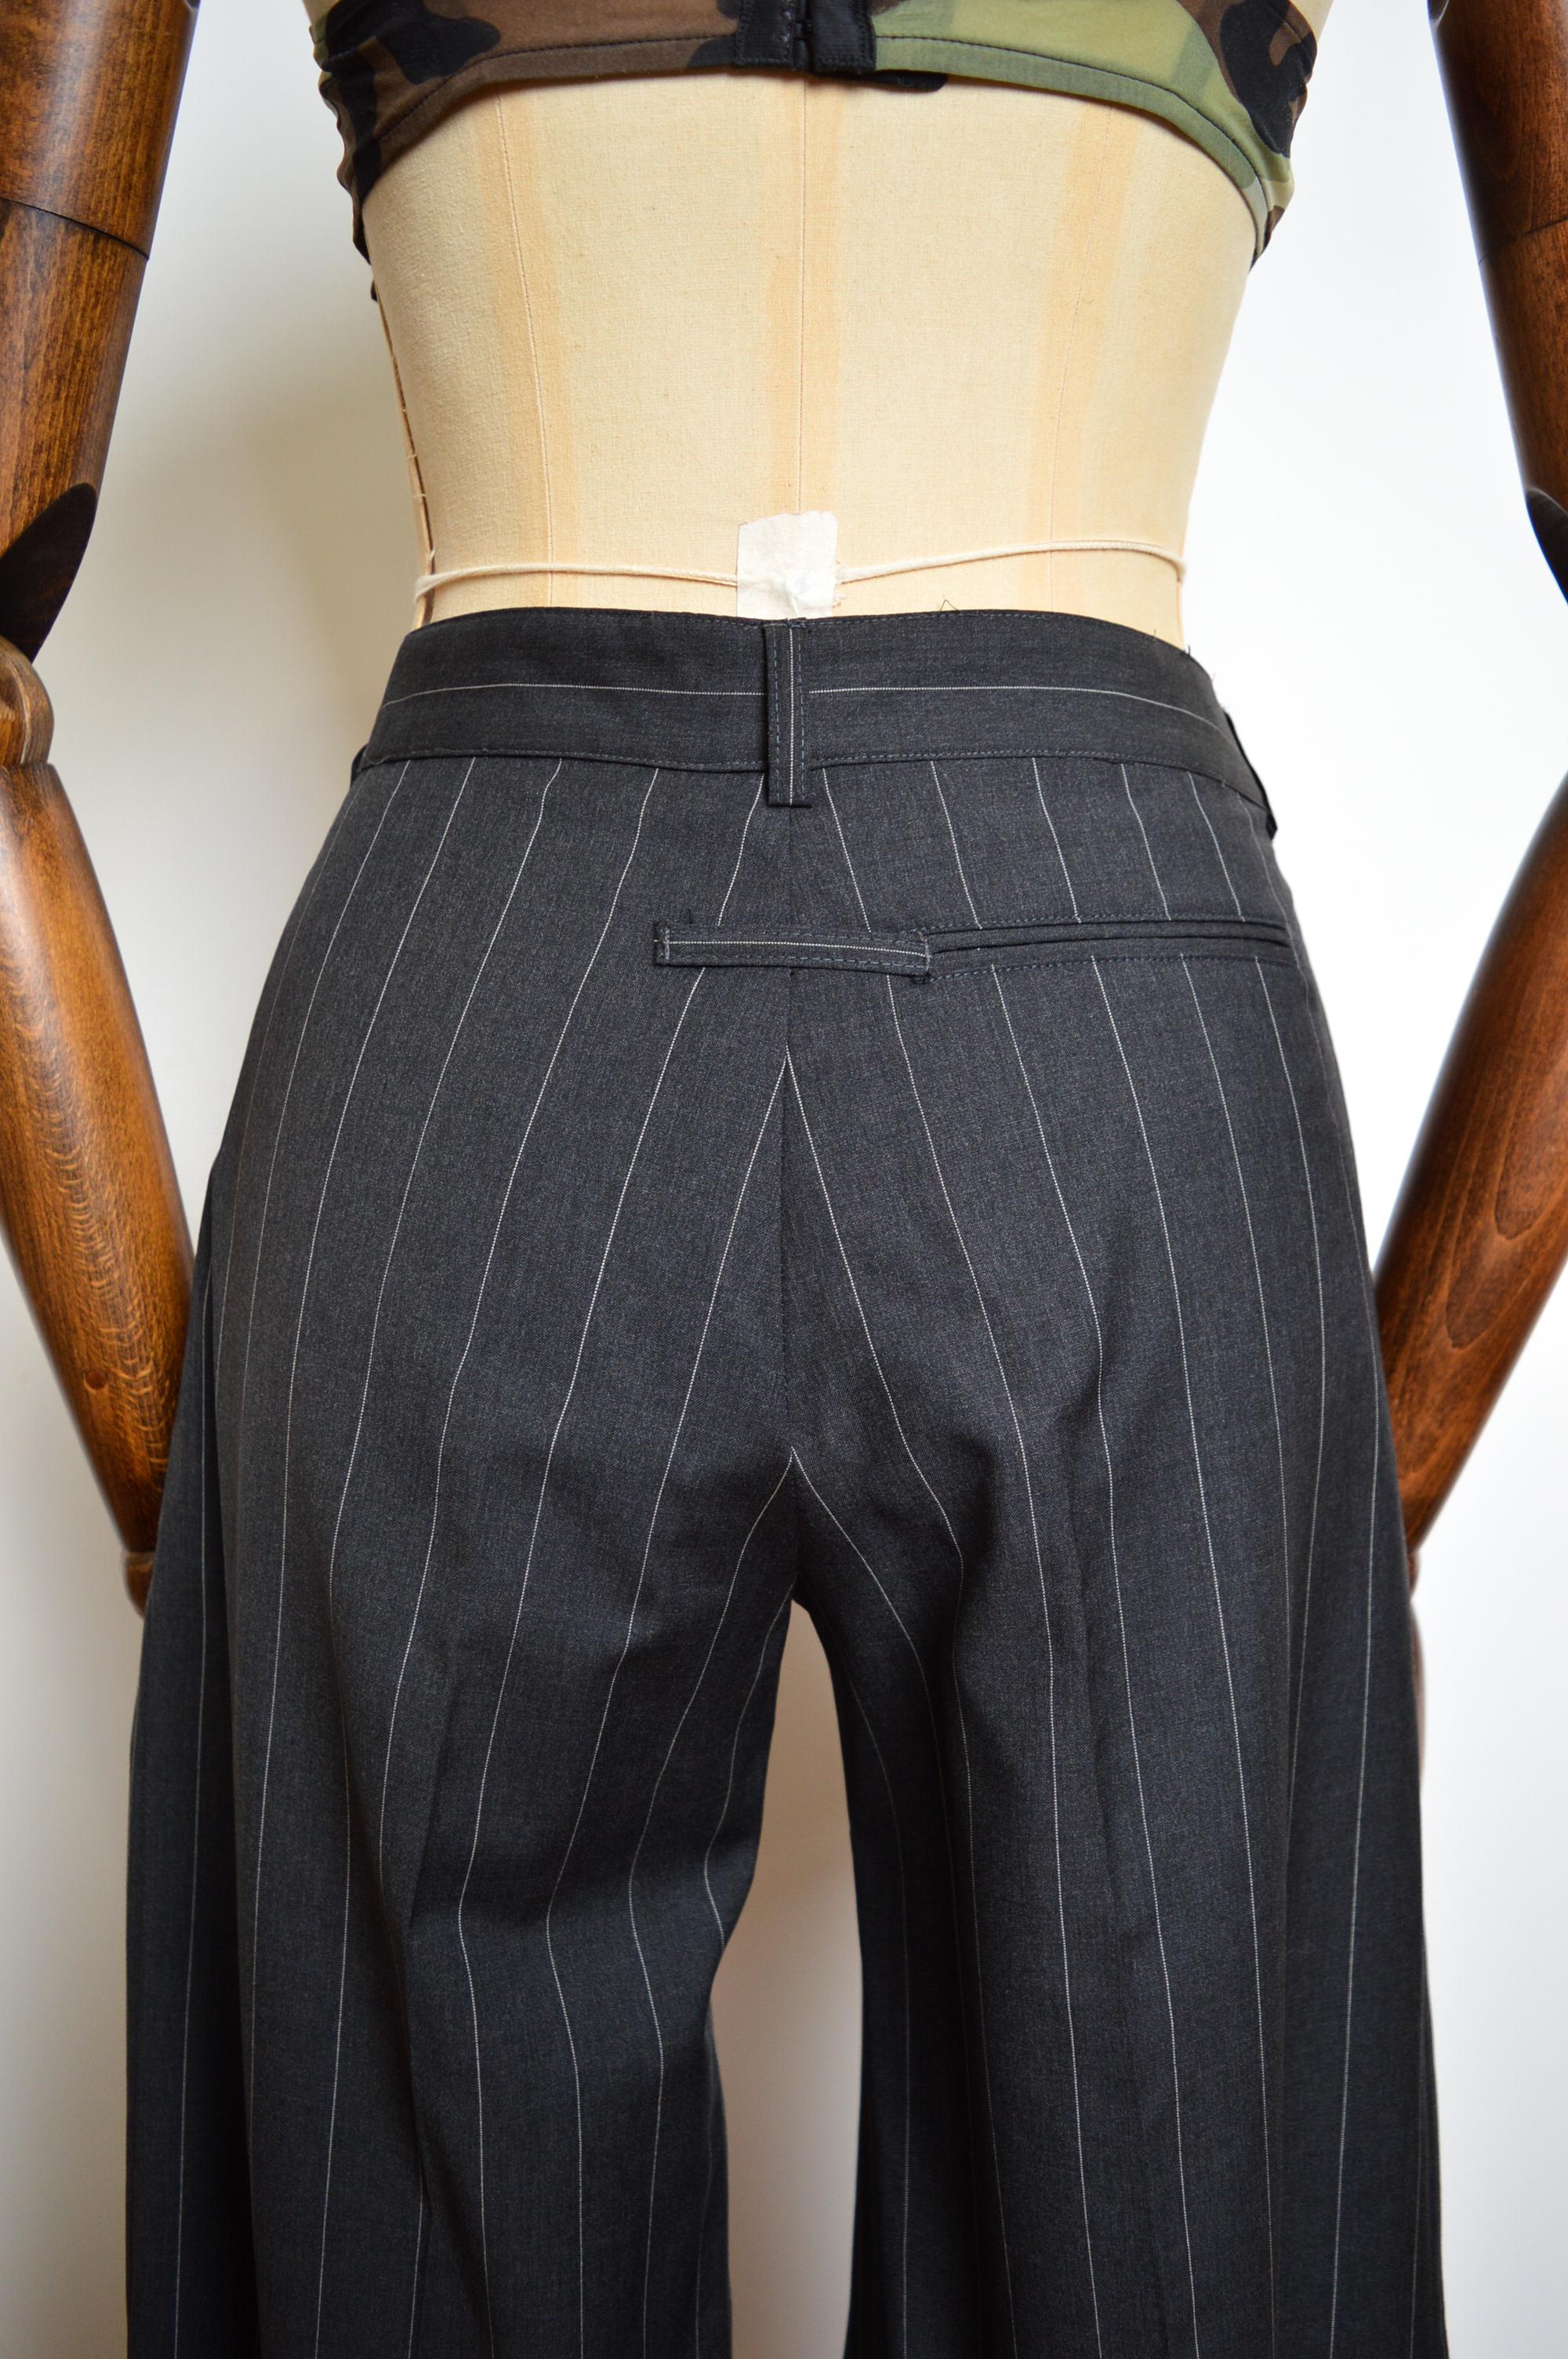 1990's High Waisted JEAN PAUL GAULTIER Pin striped Tailored Trousers - Pants For Sale 1